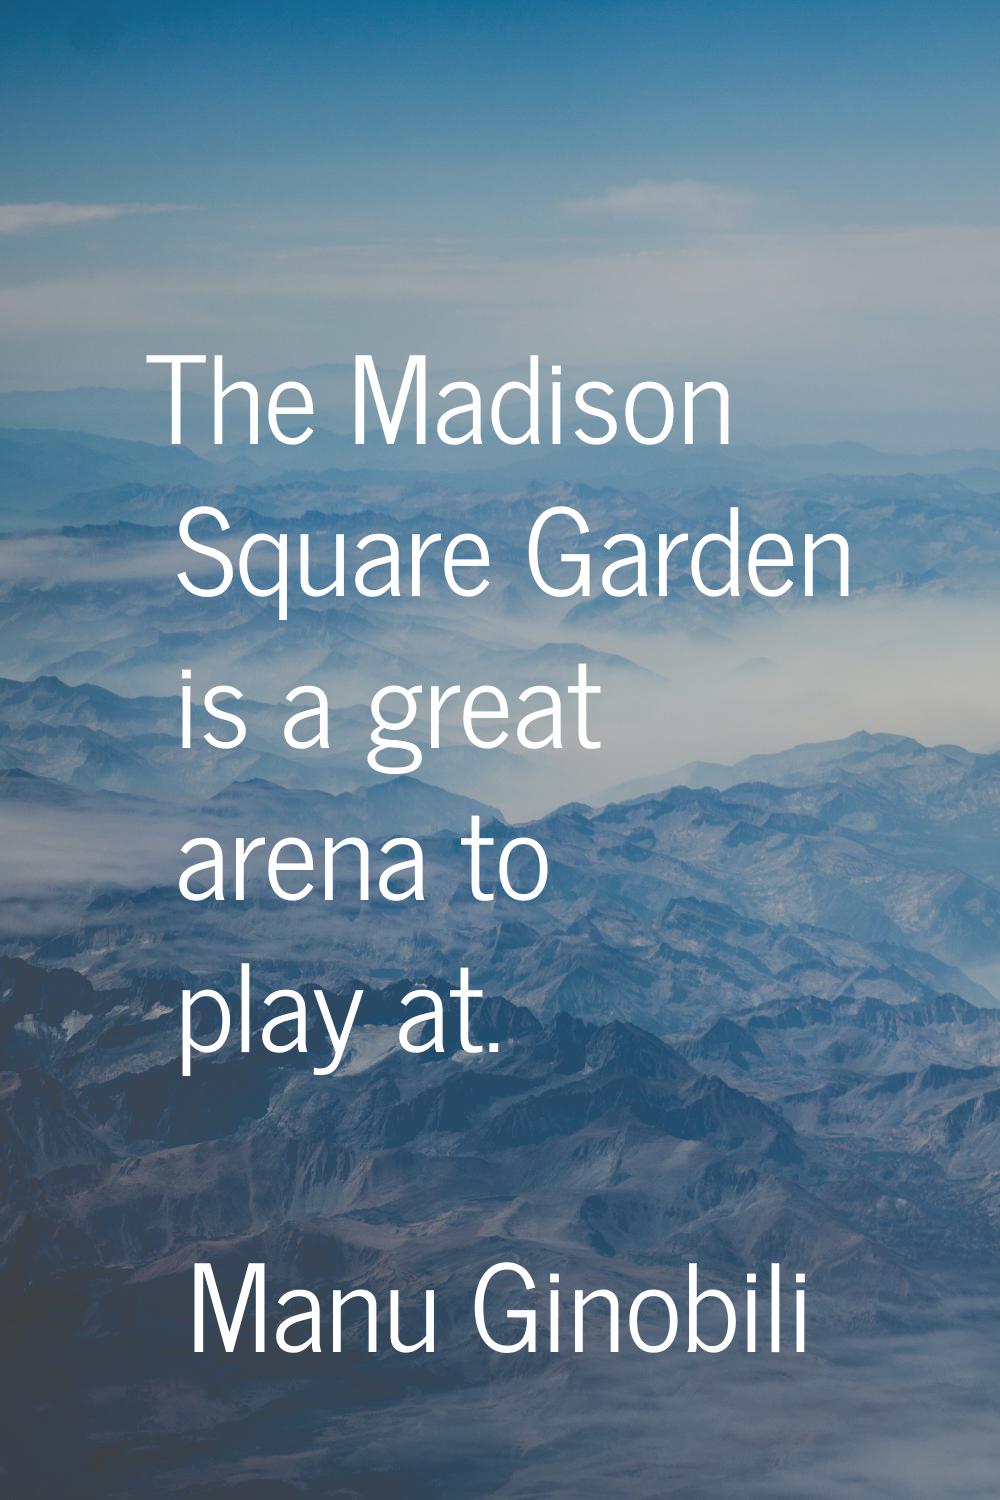 The Madison Square Garden is a great arena to play at.